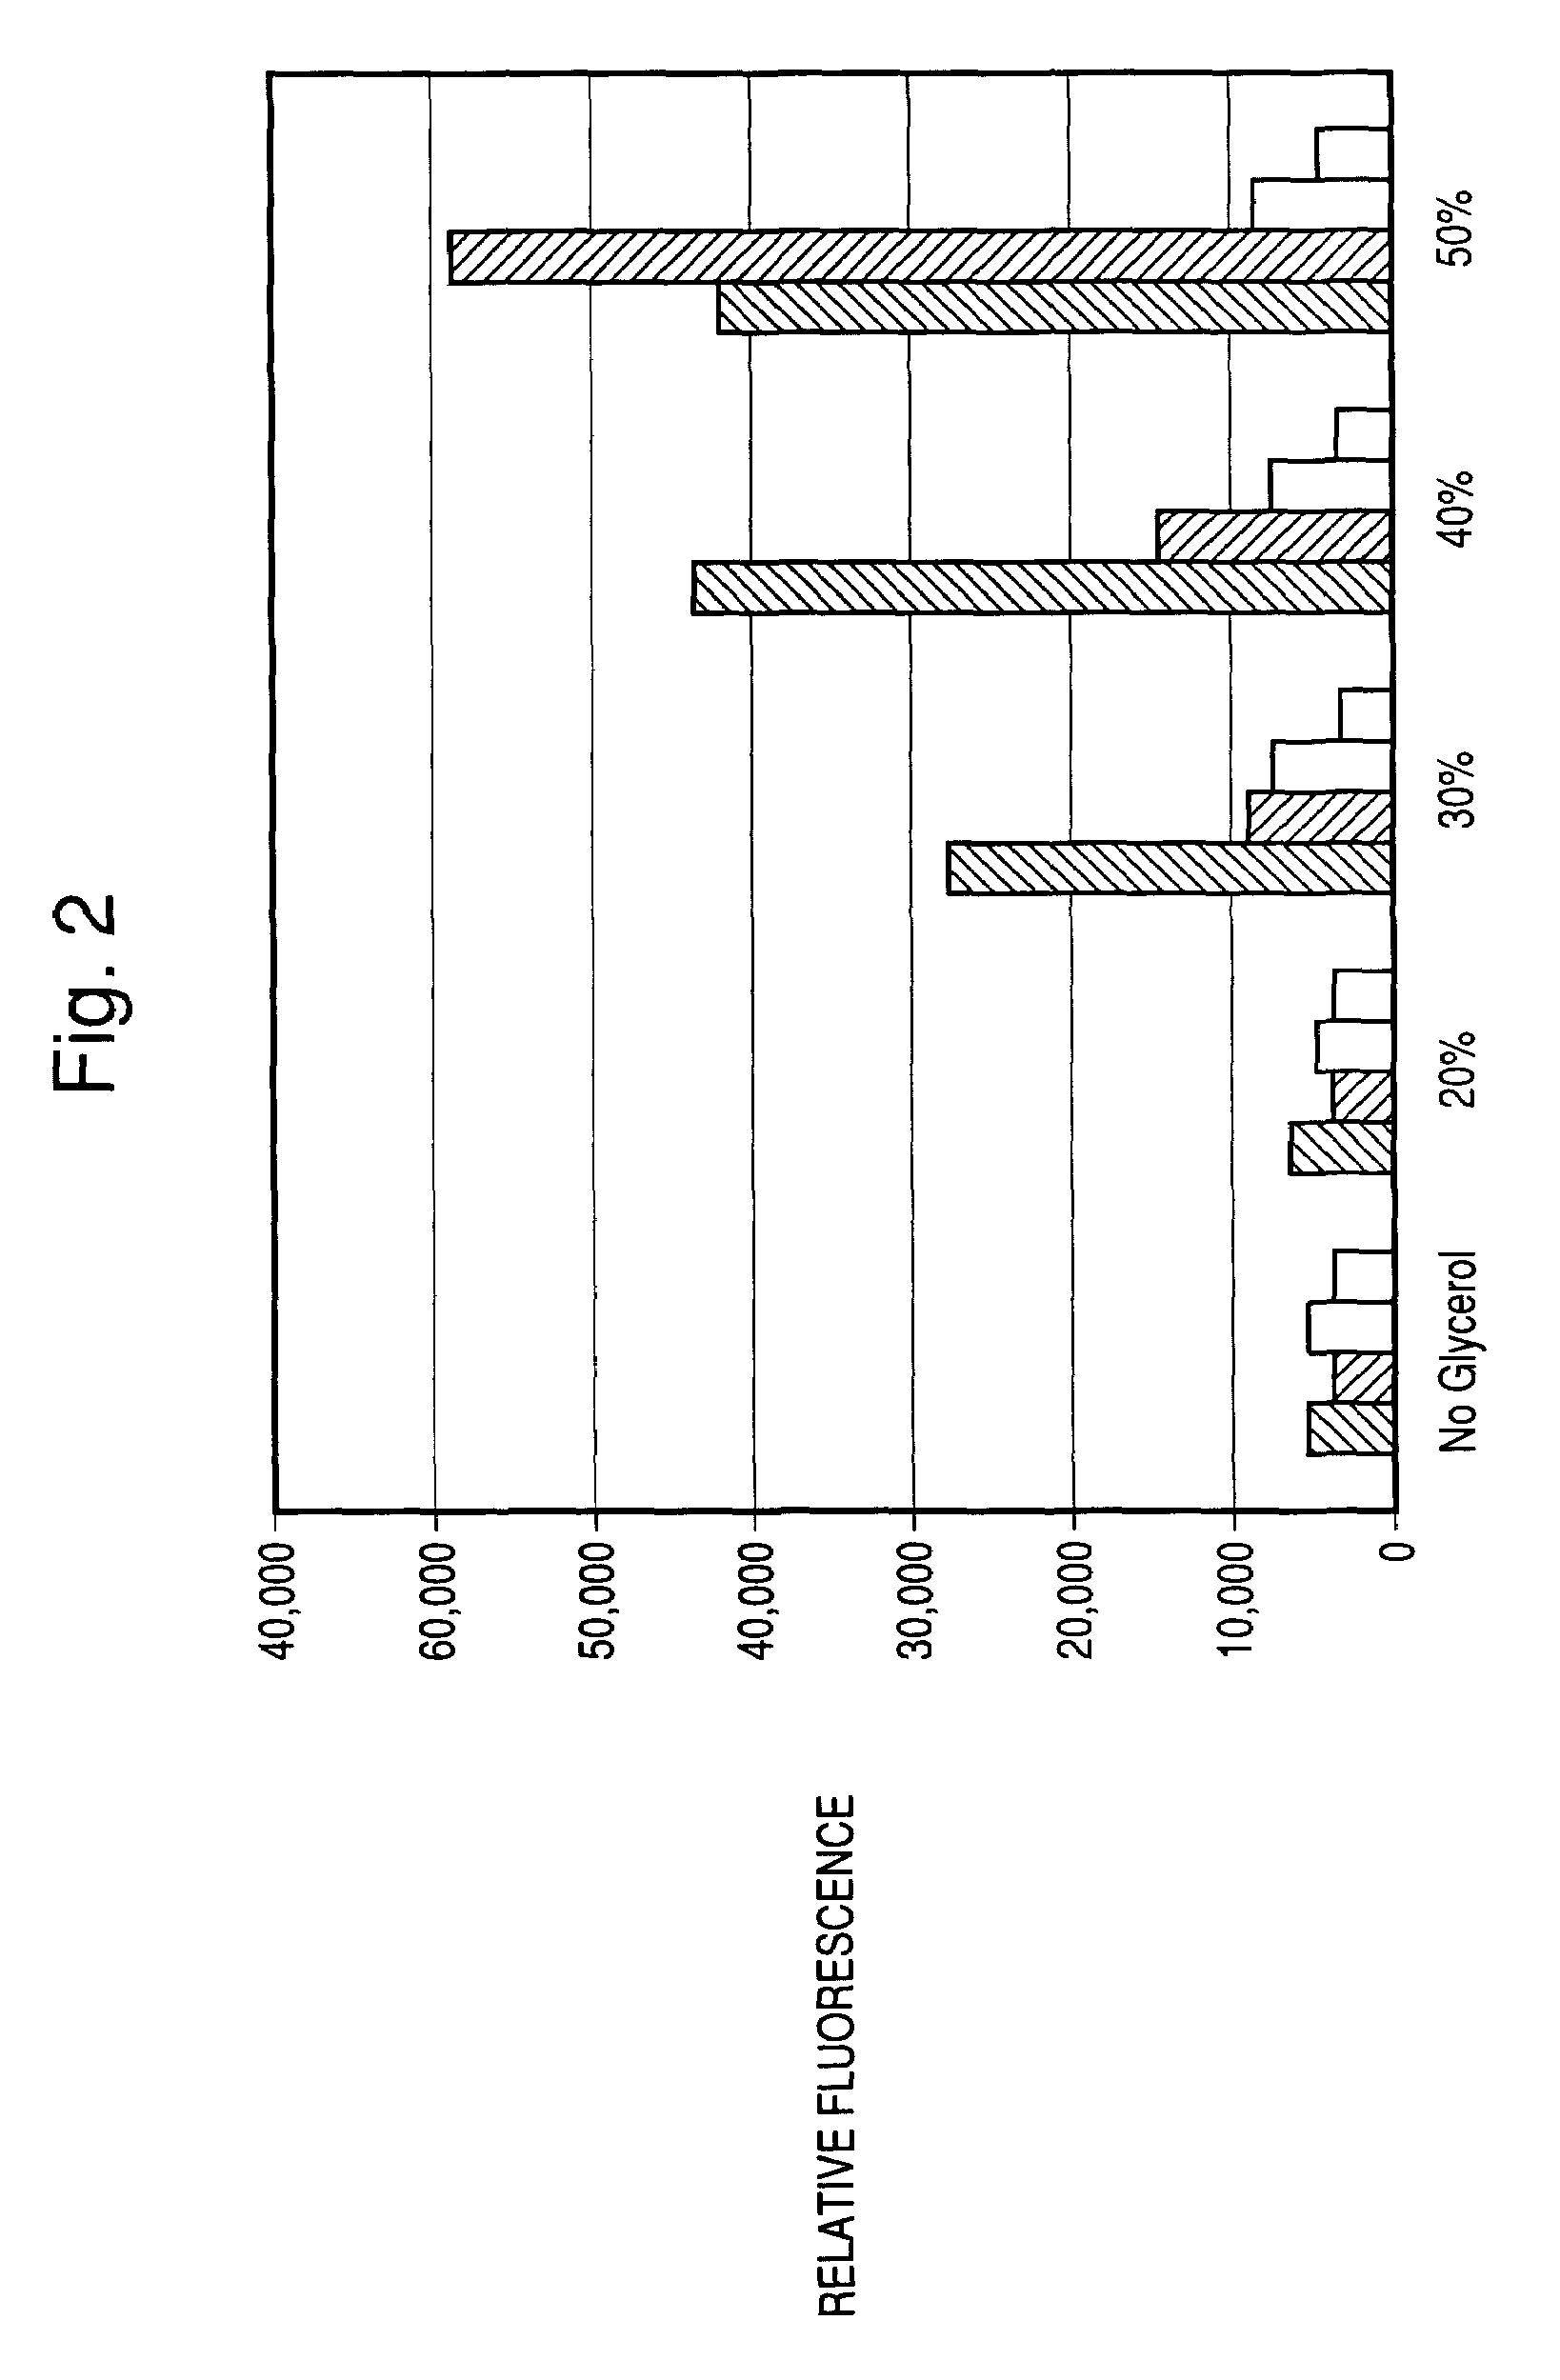 Methods and reagents for improved cell-based assays